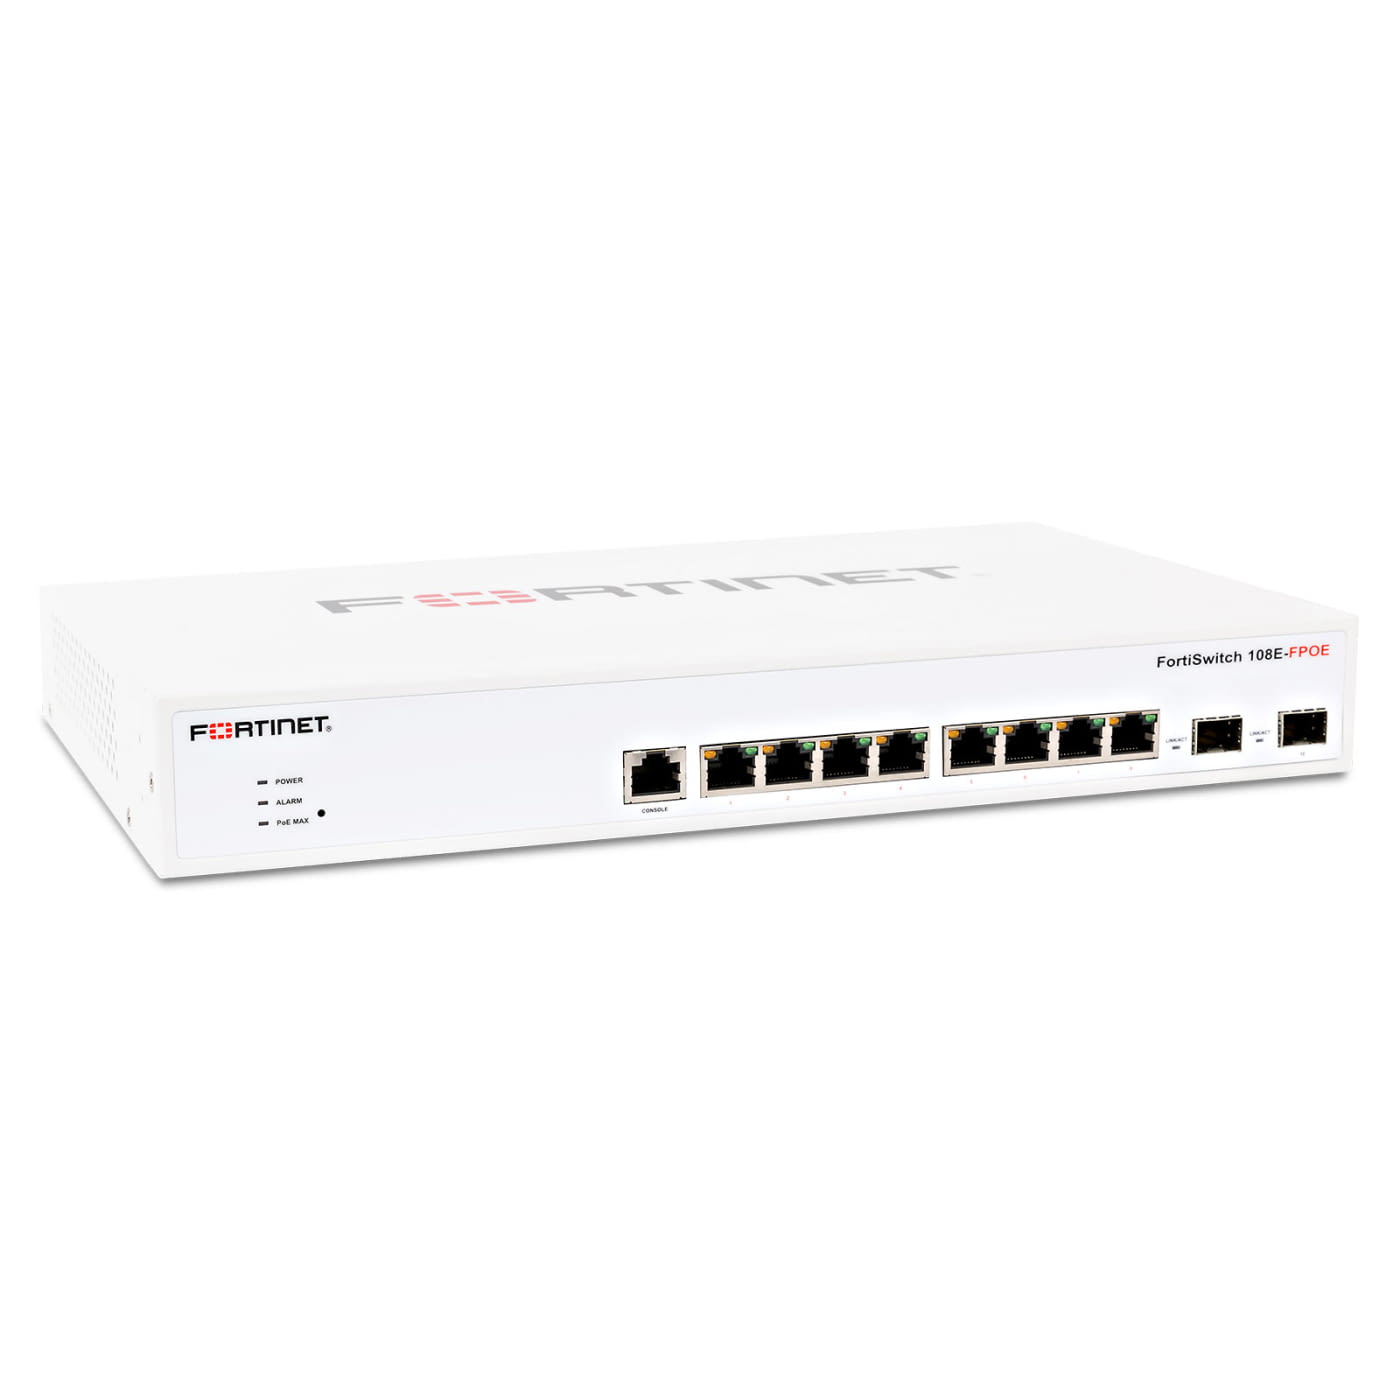 FortiSwitch 108E - POE - 